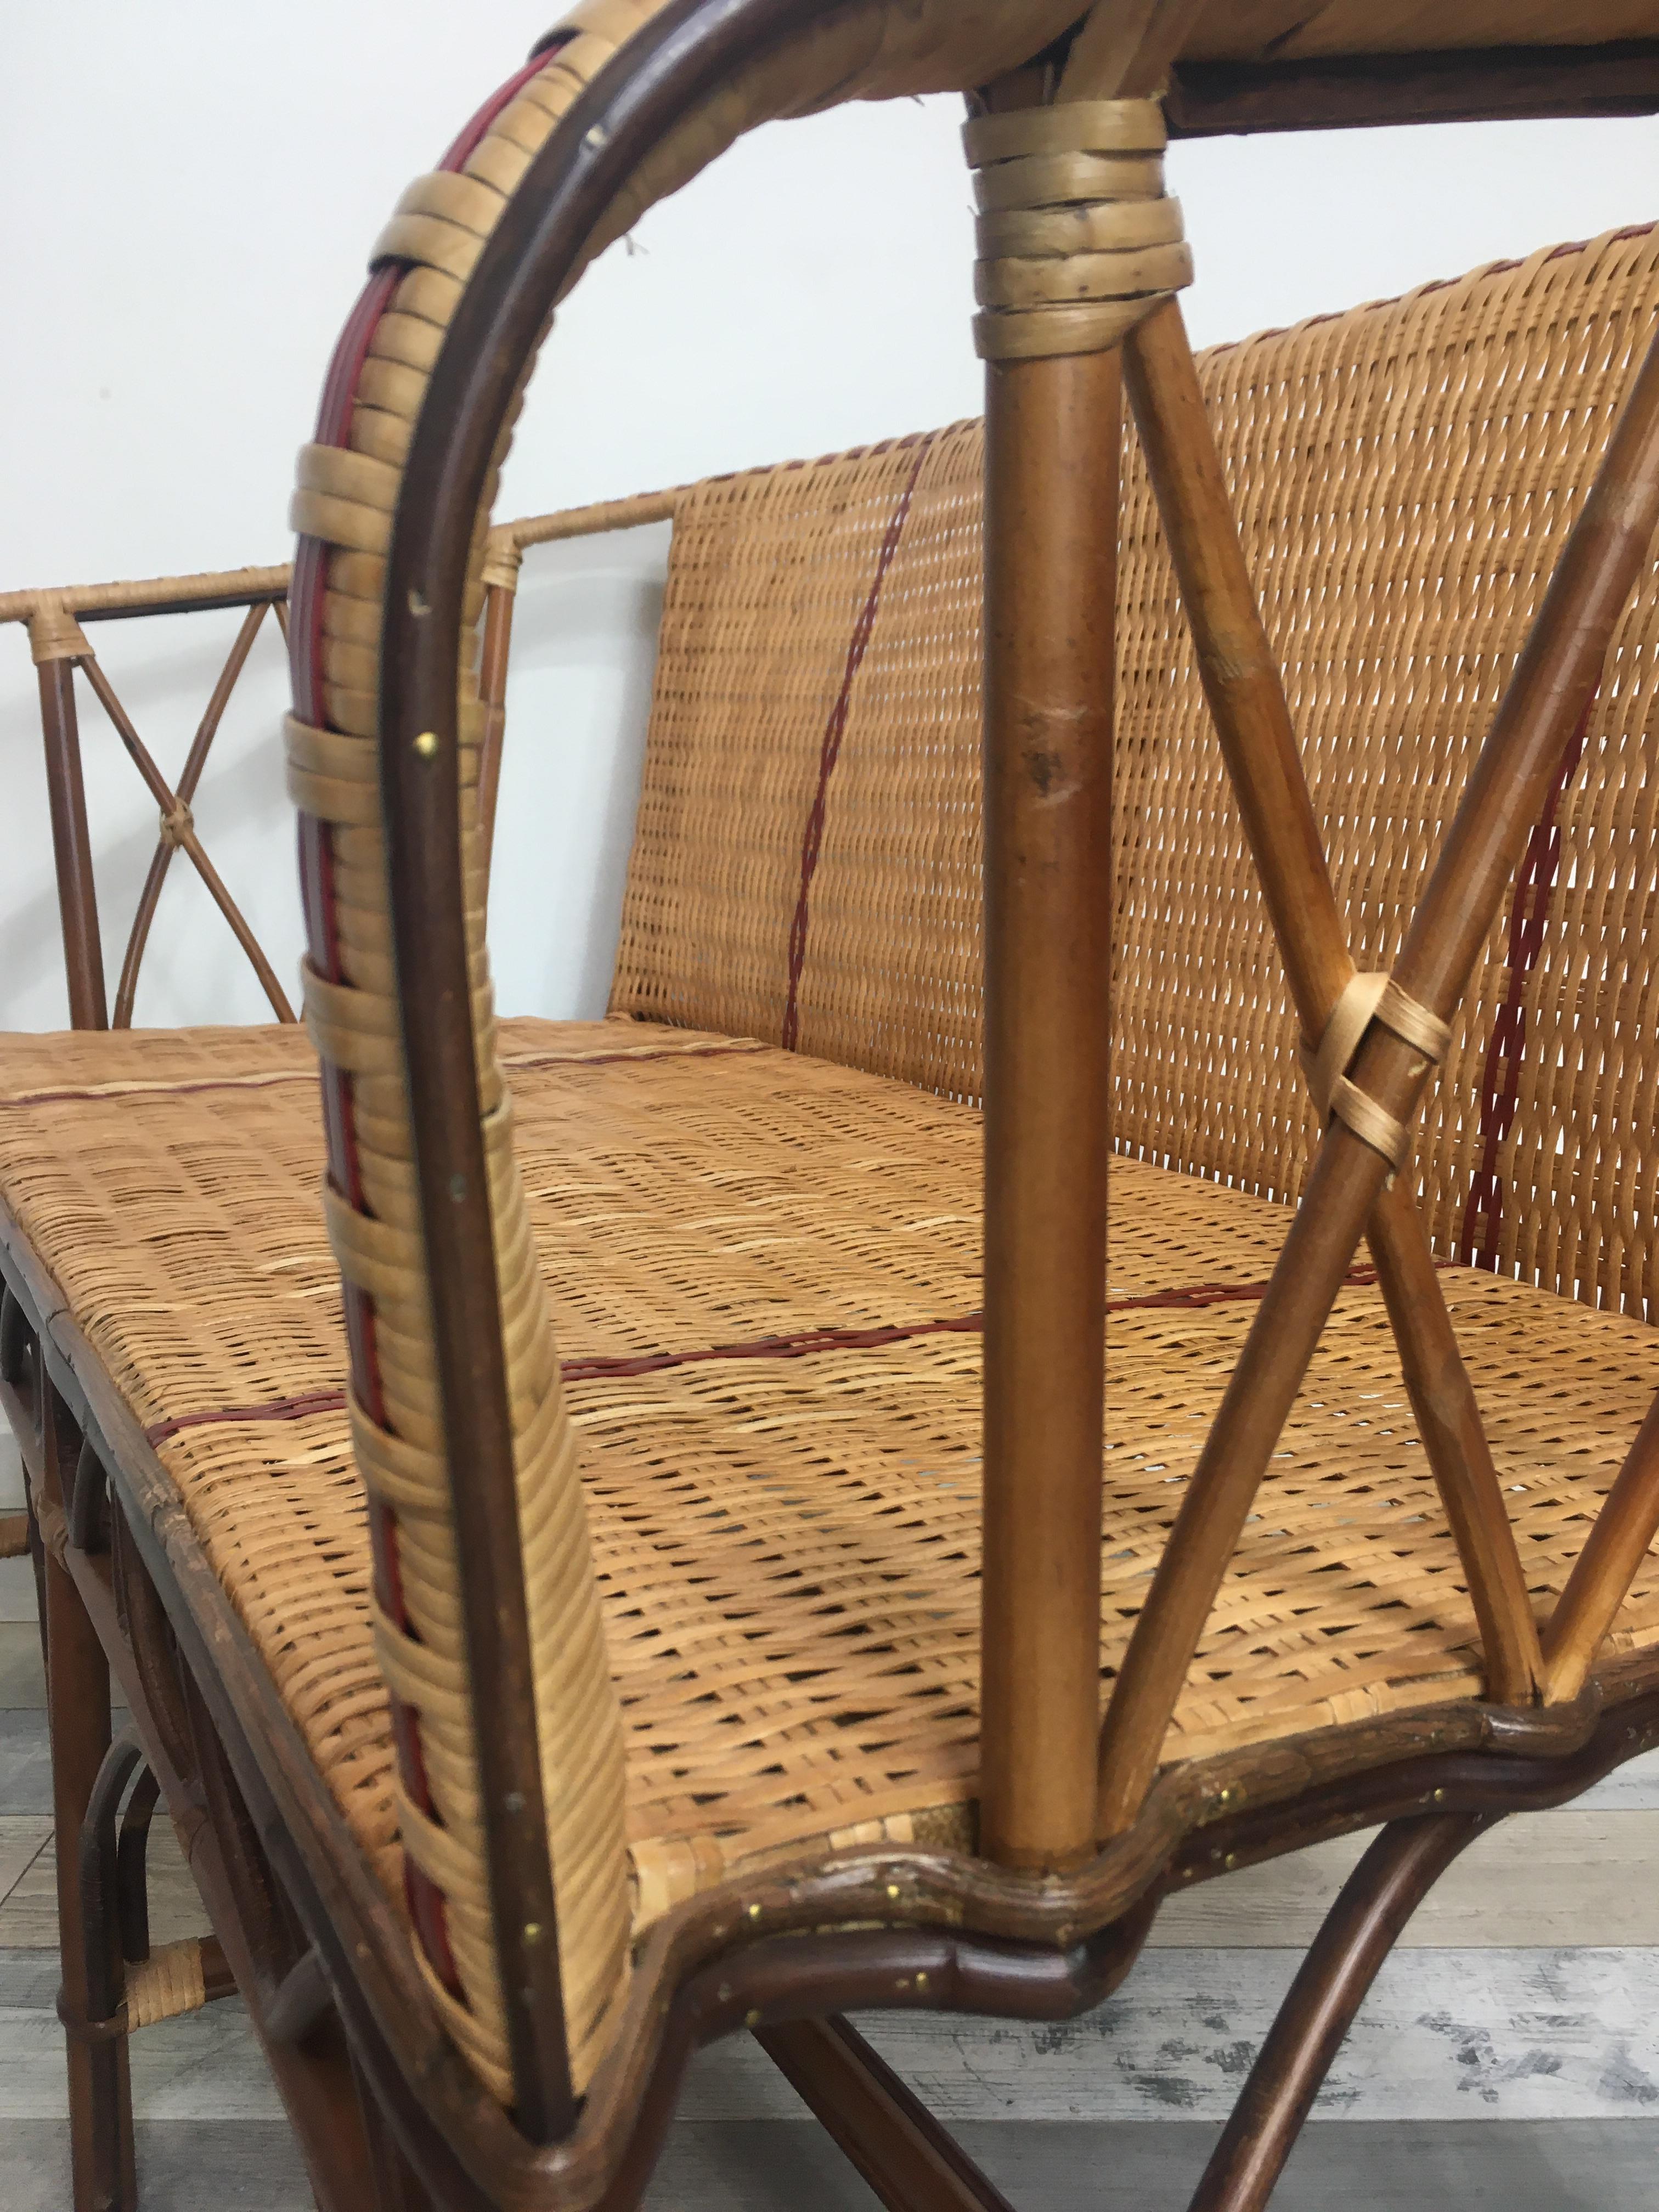 Contemporary French 1900s Design Bistro Style Sofa In Rattan and Braided Wicker Cane For Sale